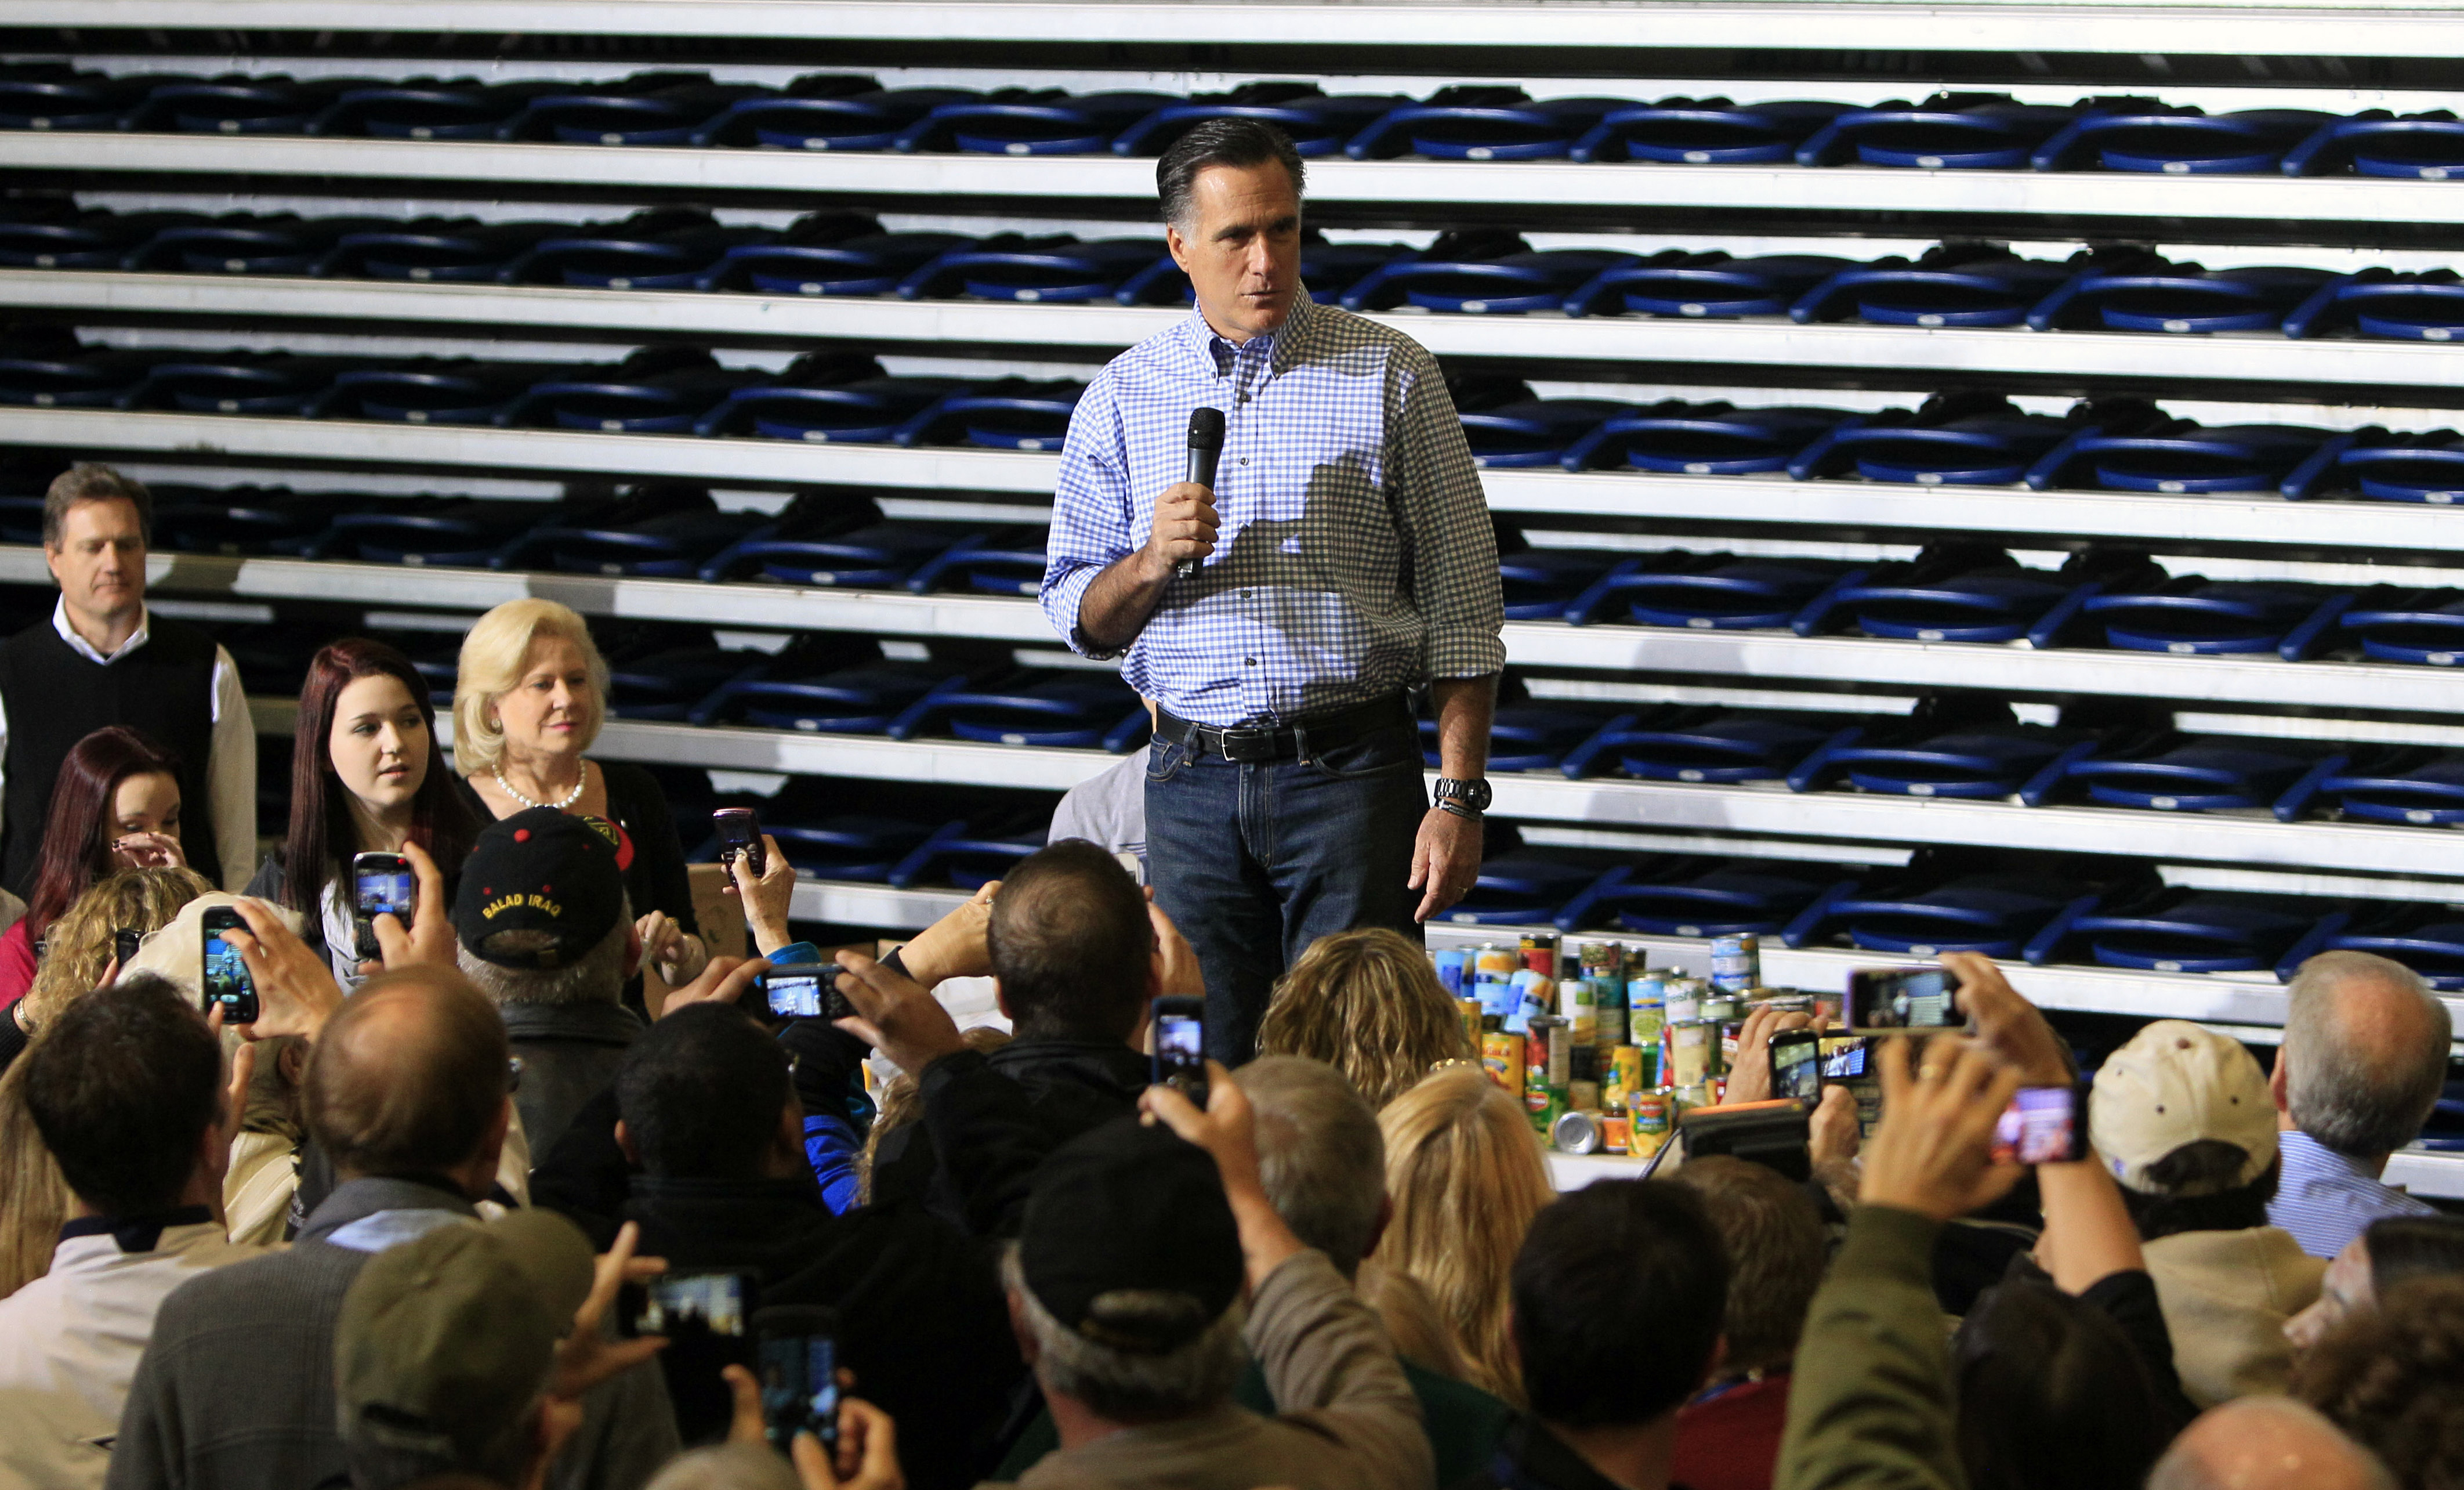 Romney rally turns into storm relief event - The Blade4248 x 2568